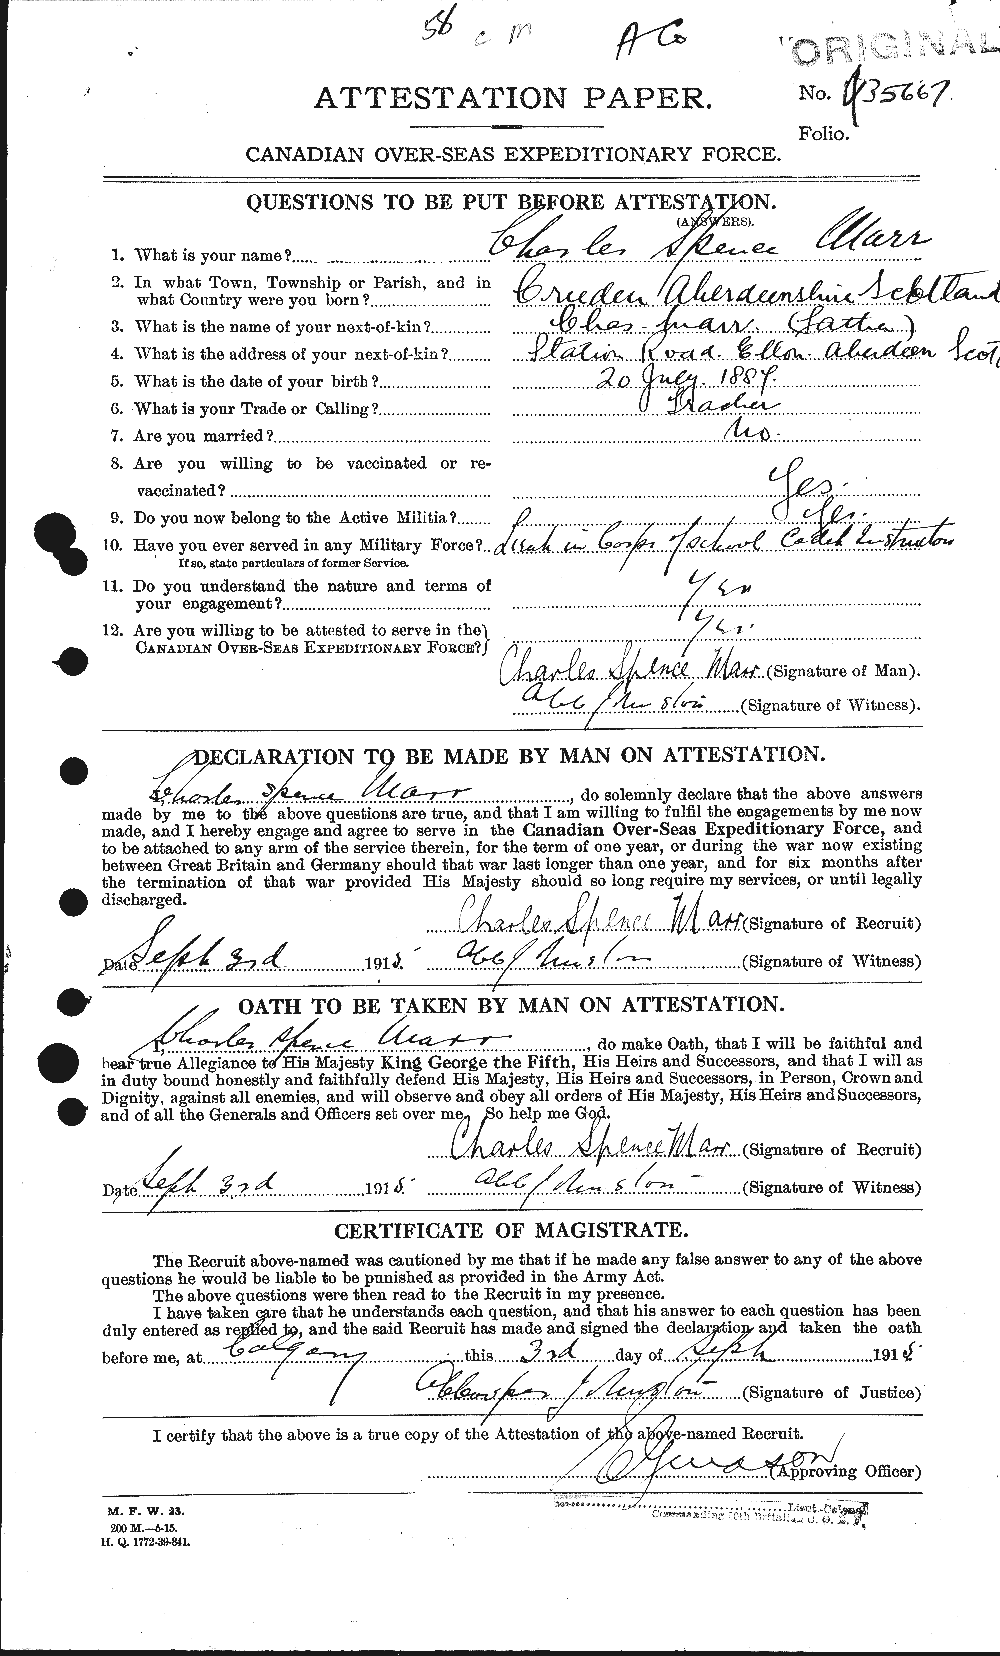 Personnel Records of the First World War - CEF 485604a